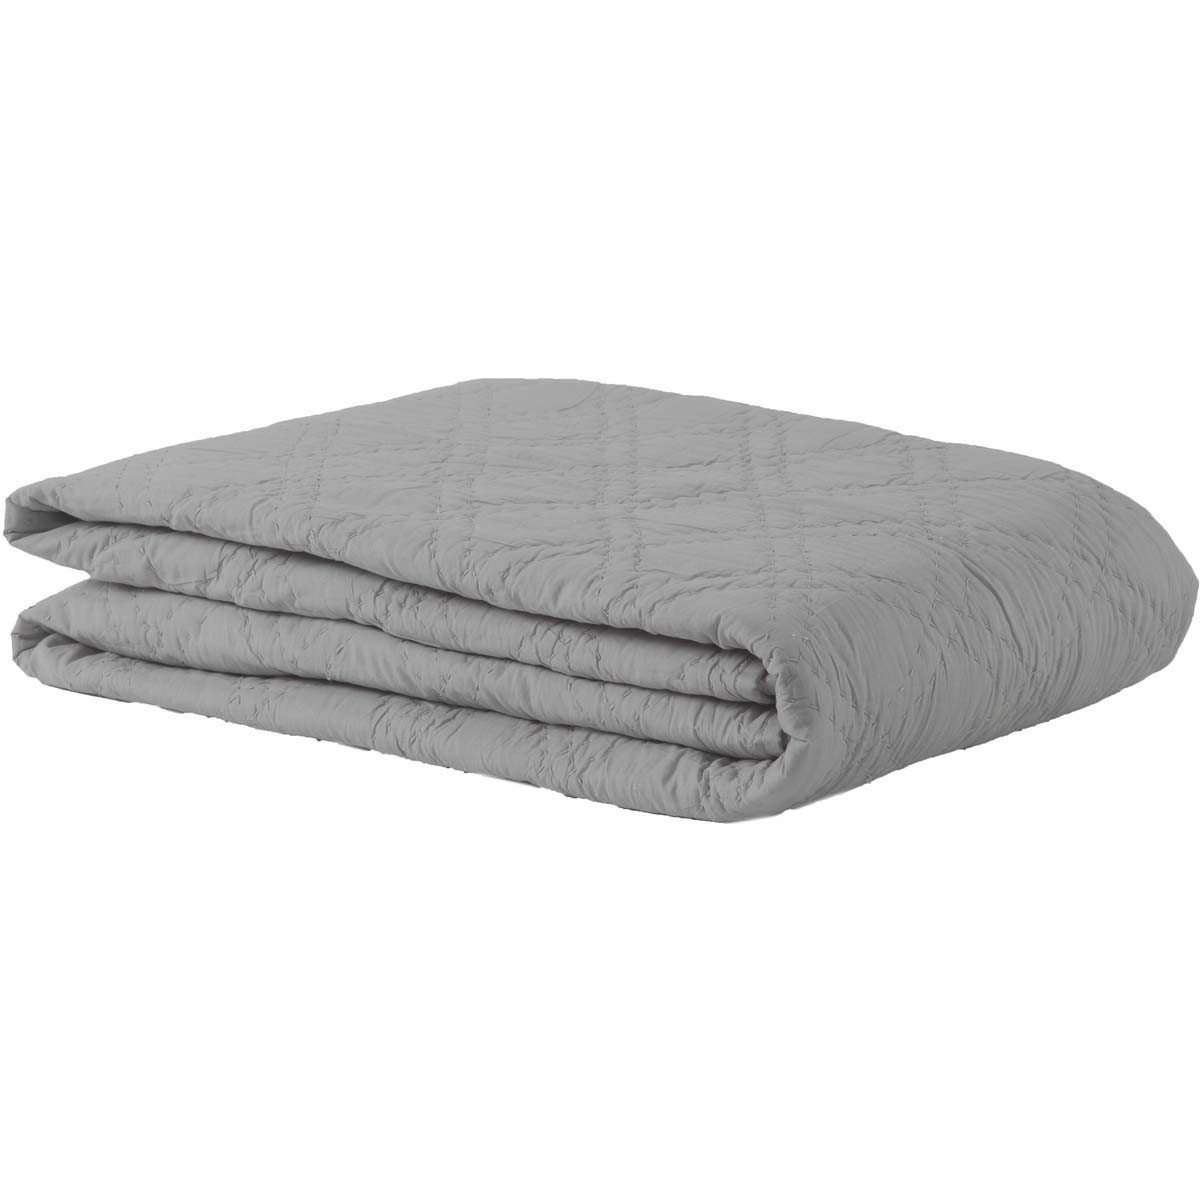 Casey Smoke Queen Quilt 92Wx92L VHC Brands folded